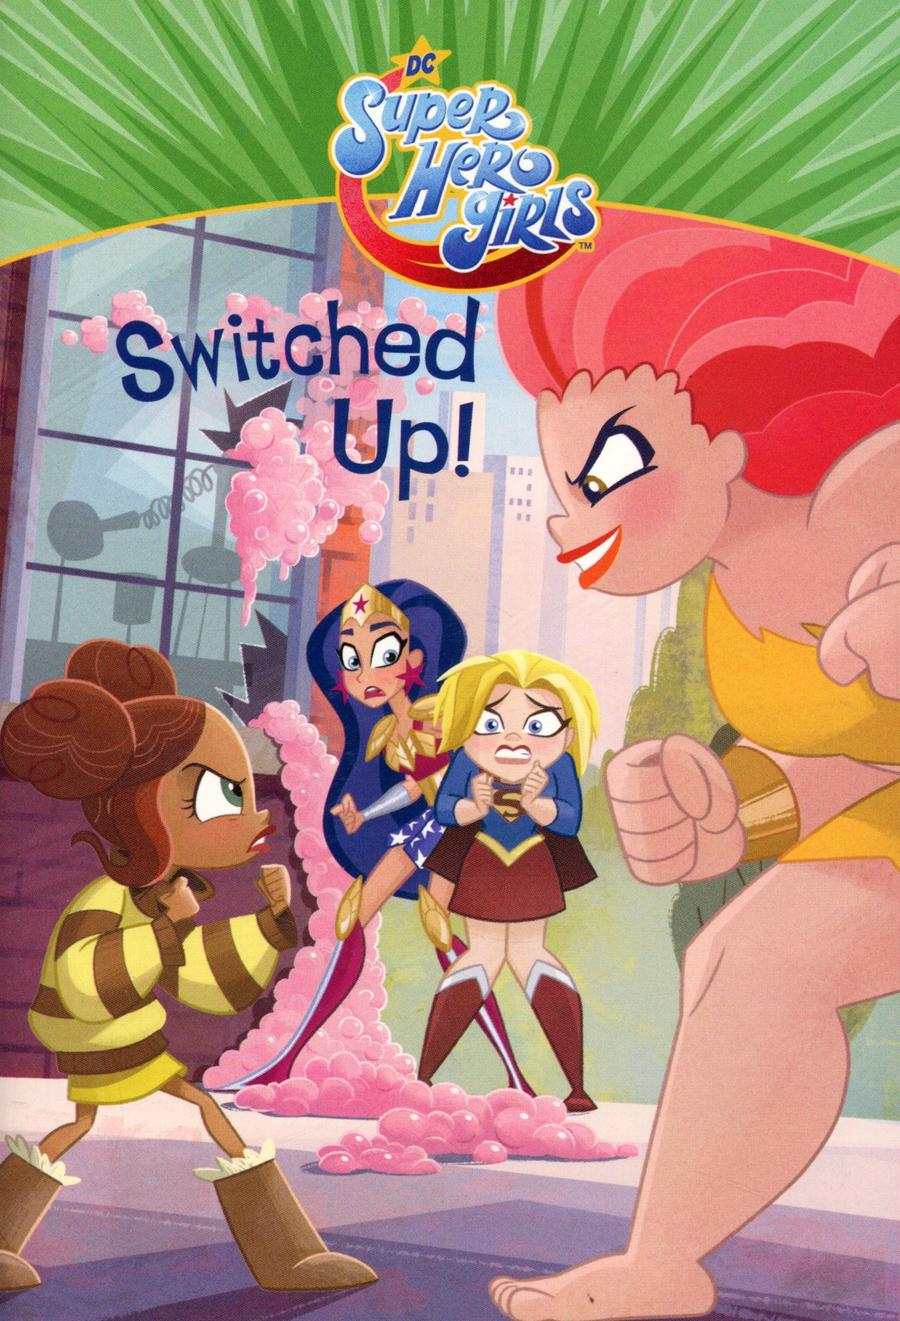 DC Super Hero Girls Switched Up SC